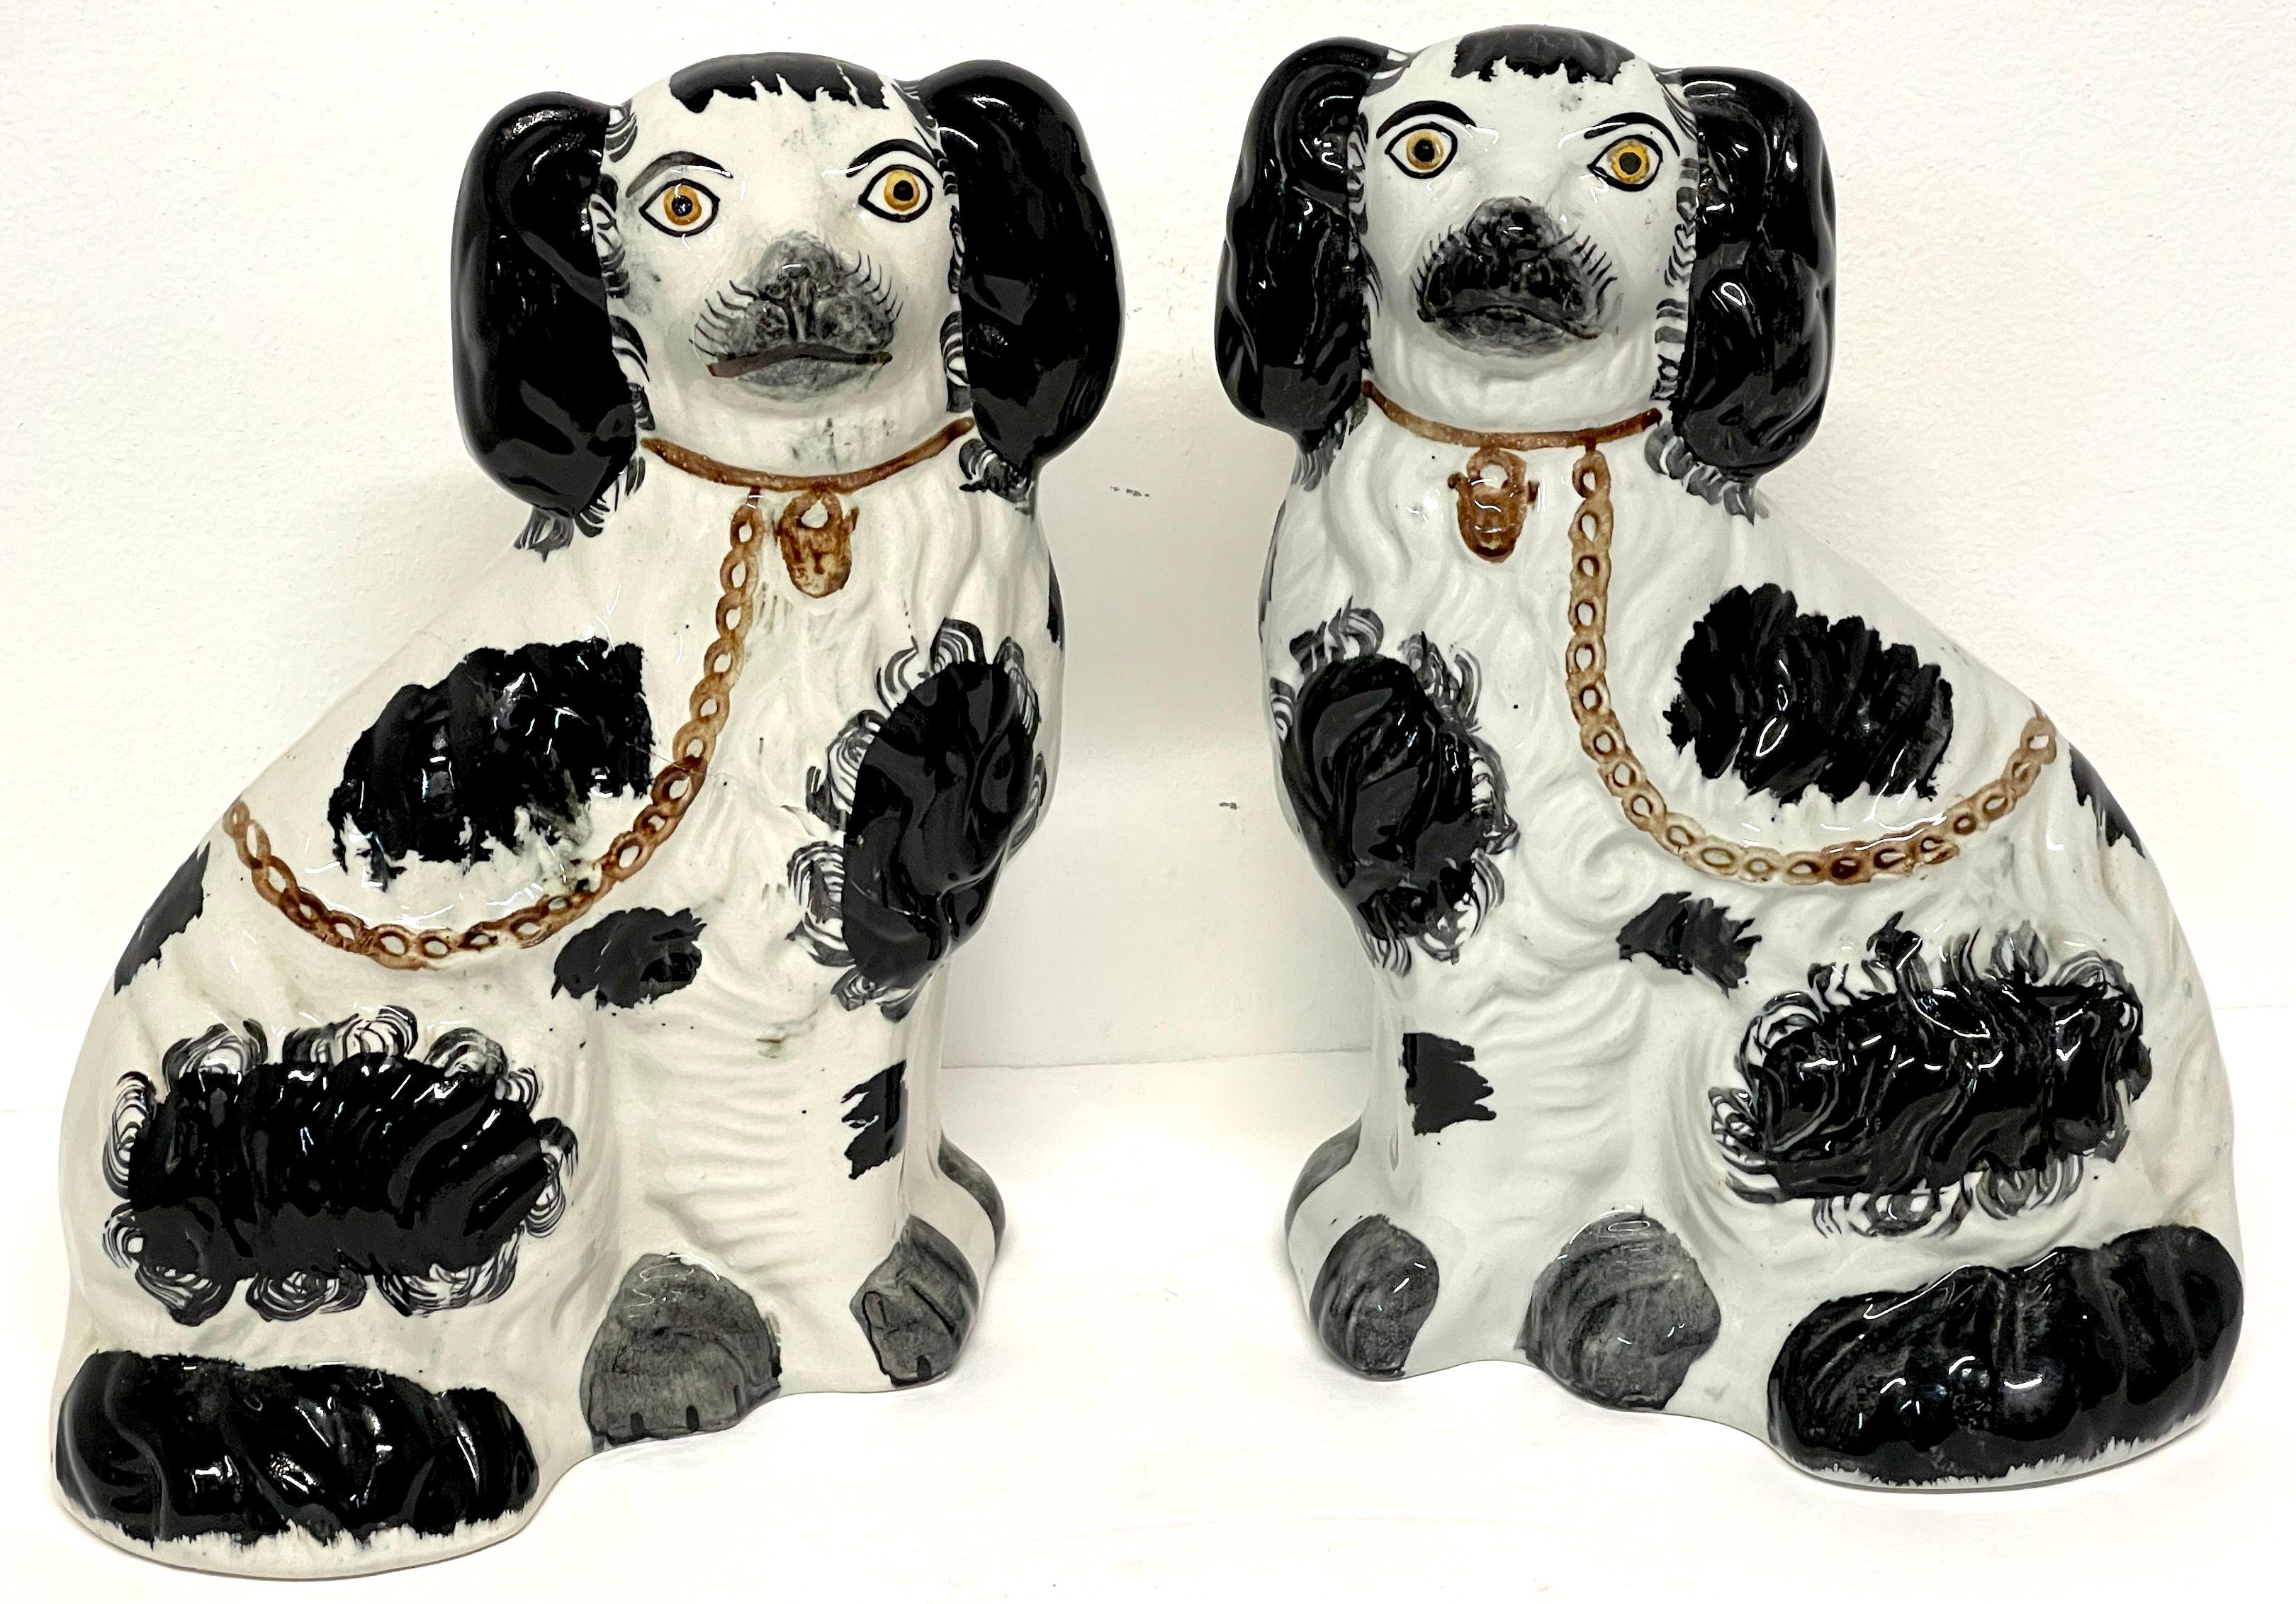 Pair of 19th century Staffordshire dogs, black & white 'Sponge' Decoration 
England, circa 1880s
A unique pair of well painted and enameled Staffordshire seated spaniels with chains. A variant with the decoration, more primitive, than usual. With